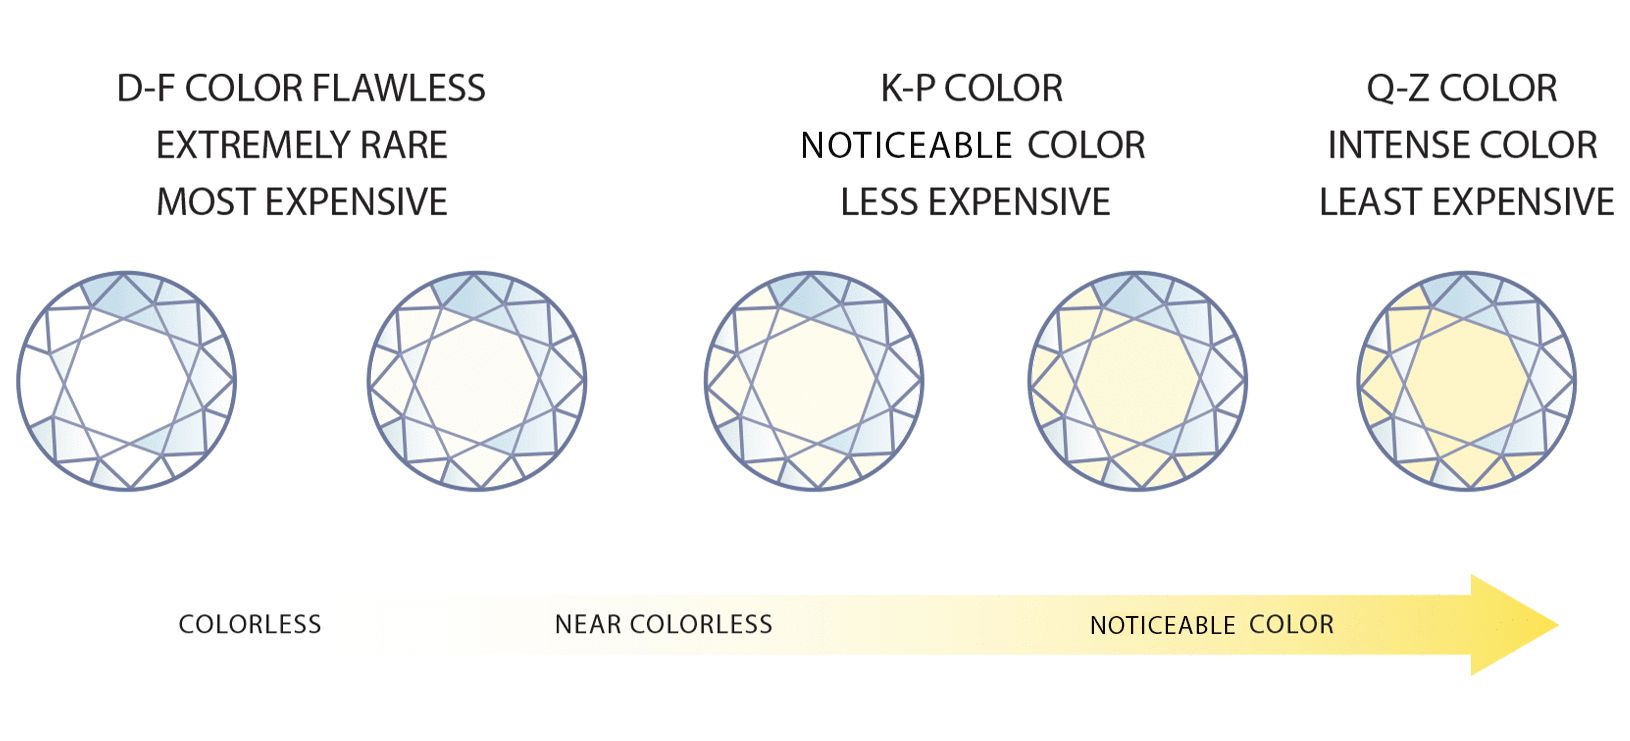 Image comparing colorless stones and stones with noticeable color